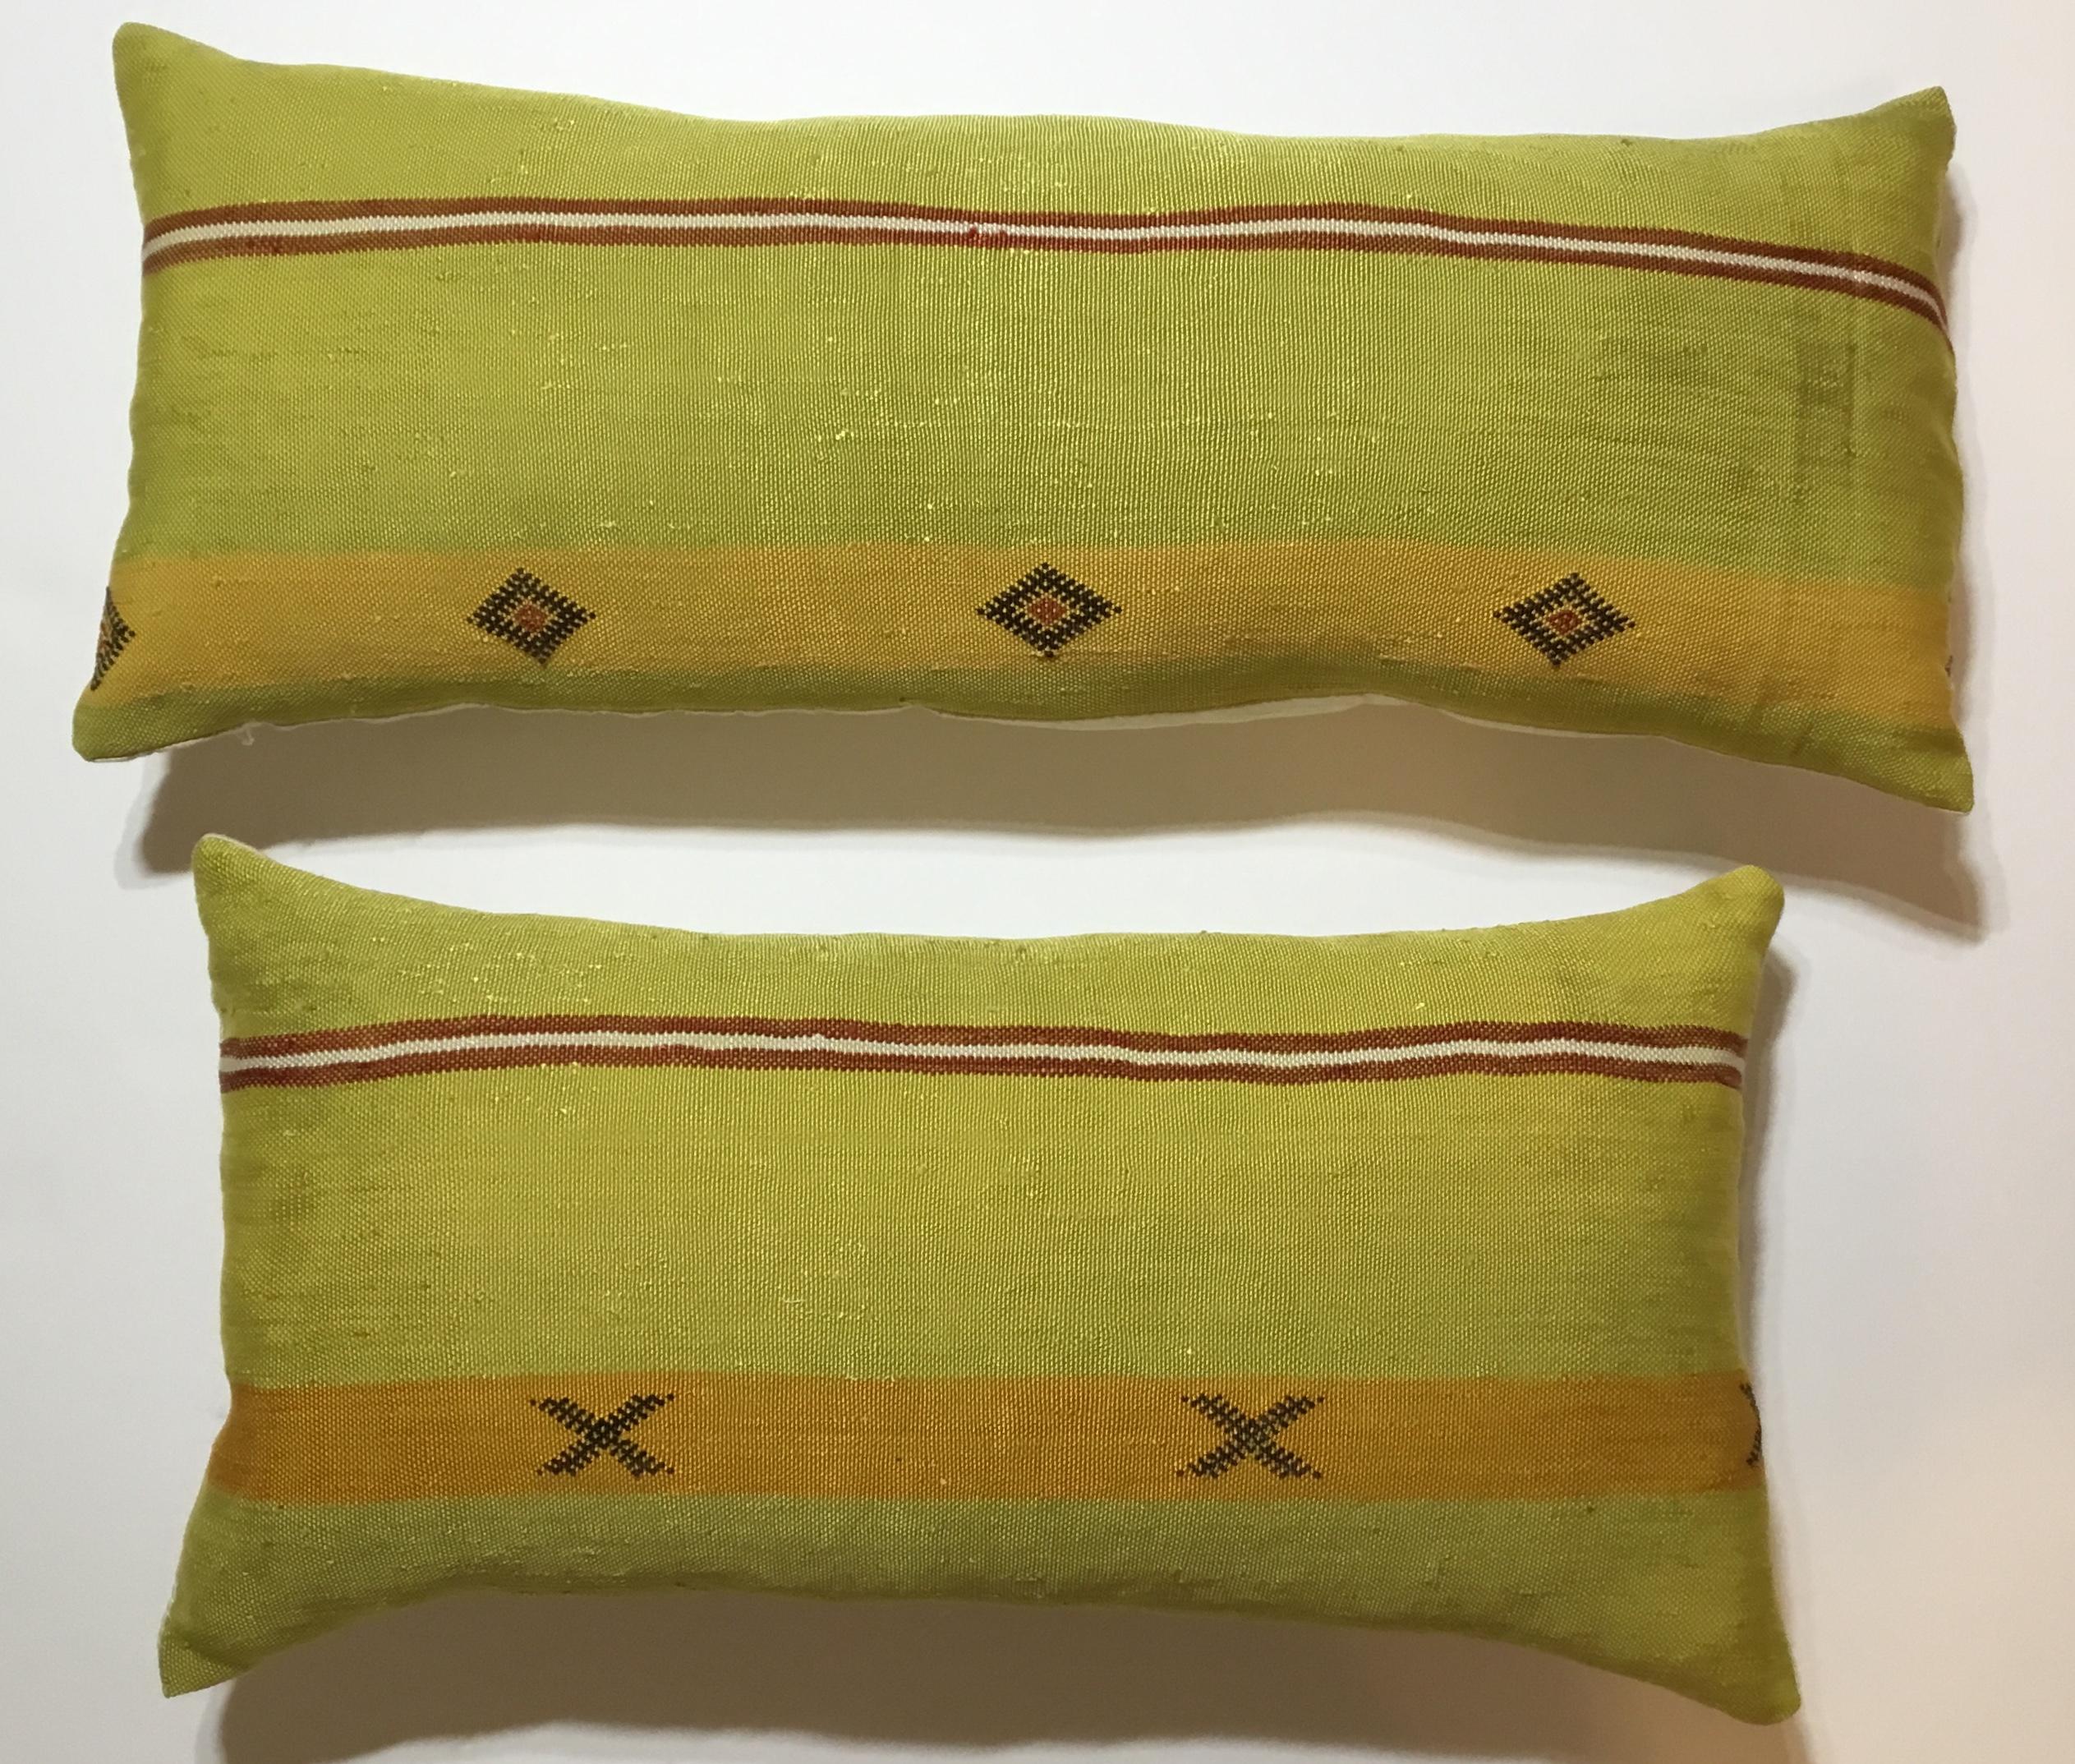 Beautiful pair of pillows made of handwoven flat-weave Kilim textile fragment ,with geometric motifs , unusual funky colors of black muster and lime, fine silk backing and fresh inserts.
Size:
23”.5 x 12”x 4”
27” x 11” x 4”.
  